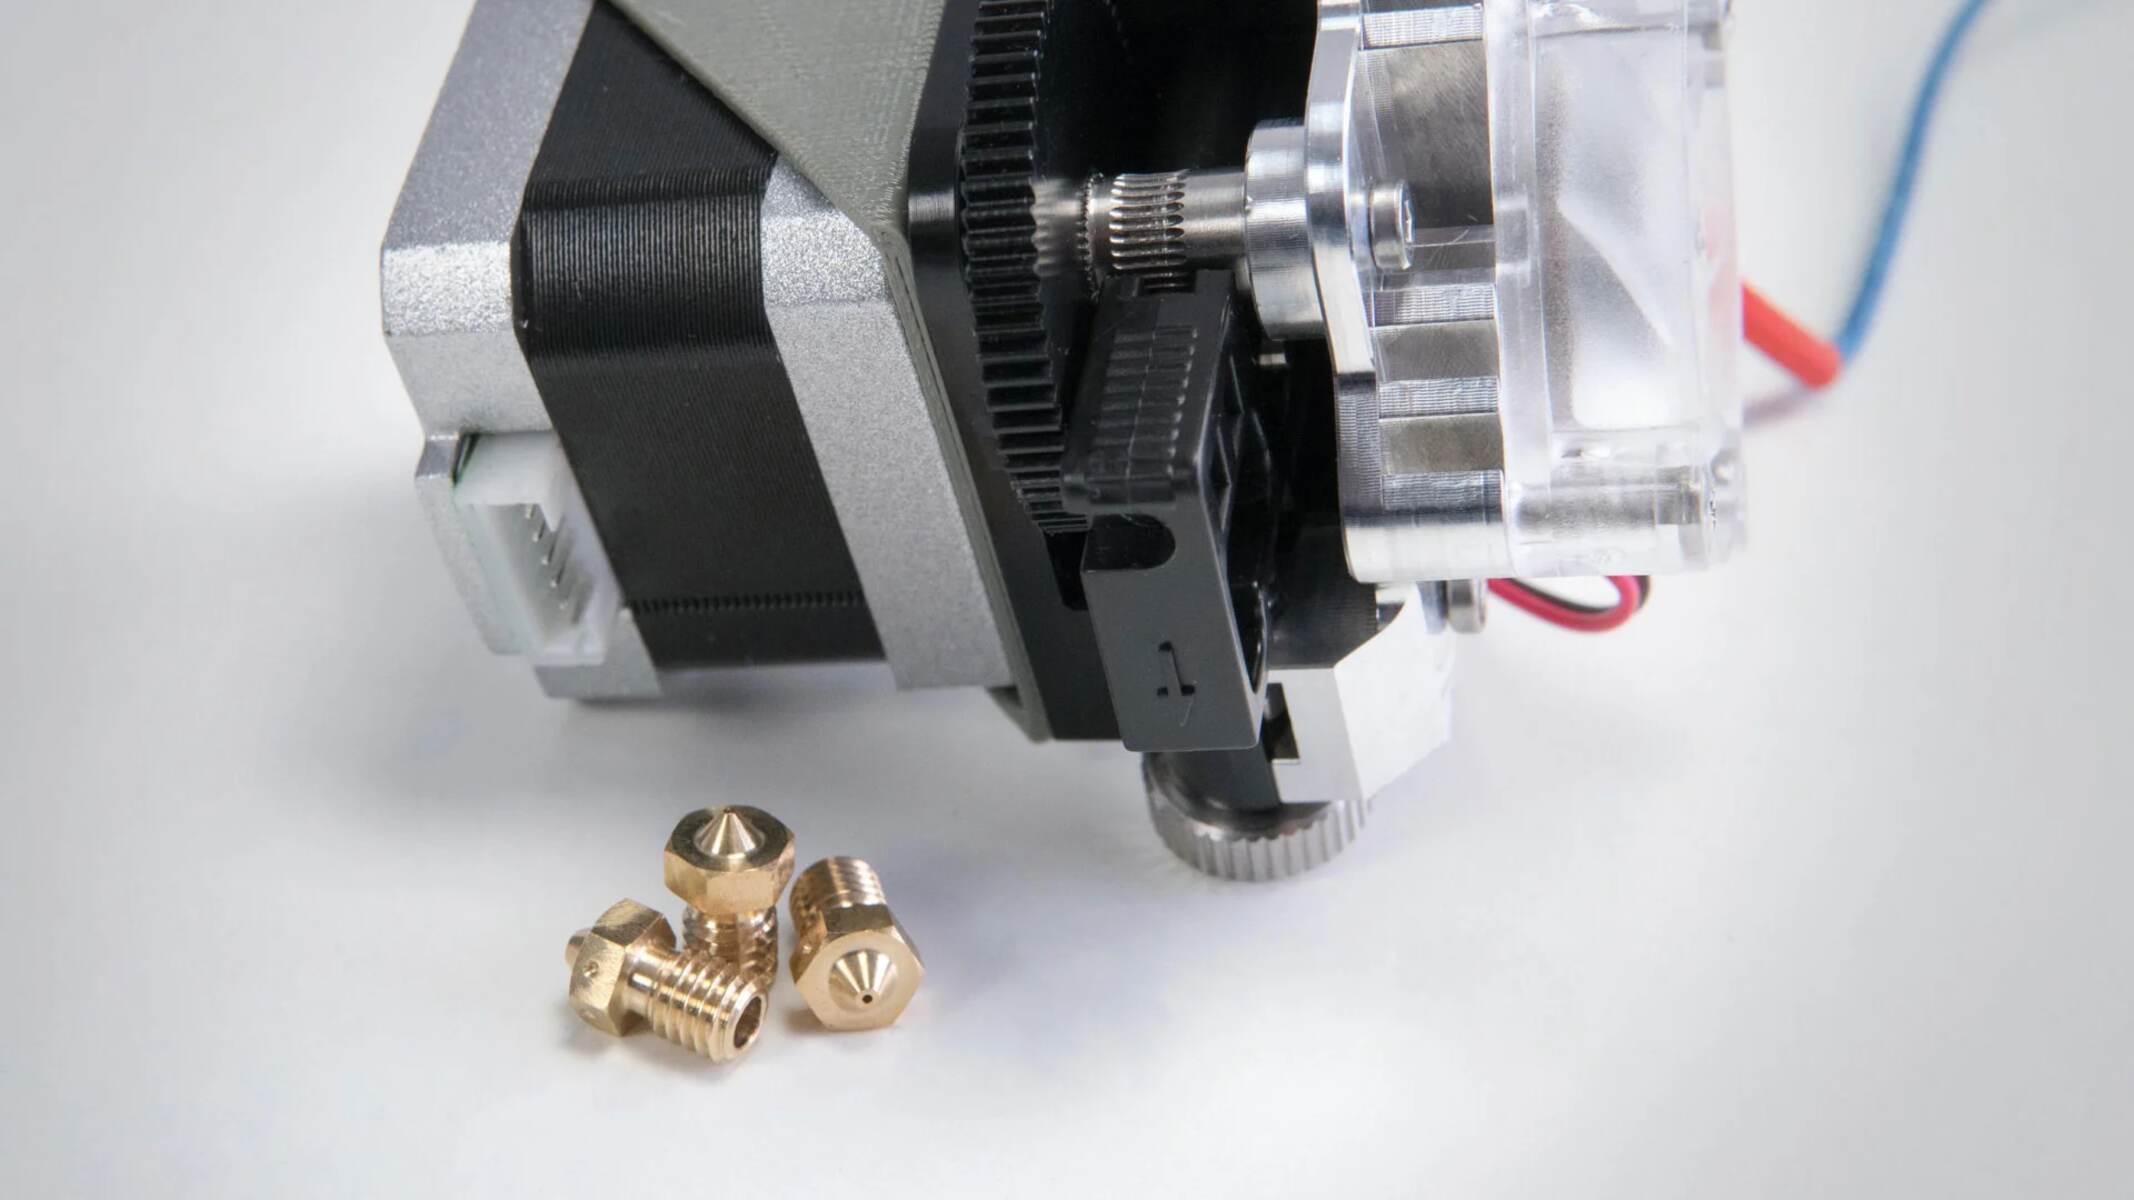 What Is The Function Of The Extruder In A 3D Printer